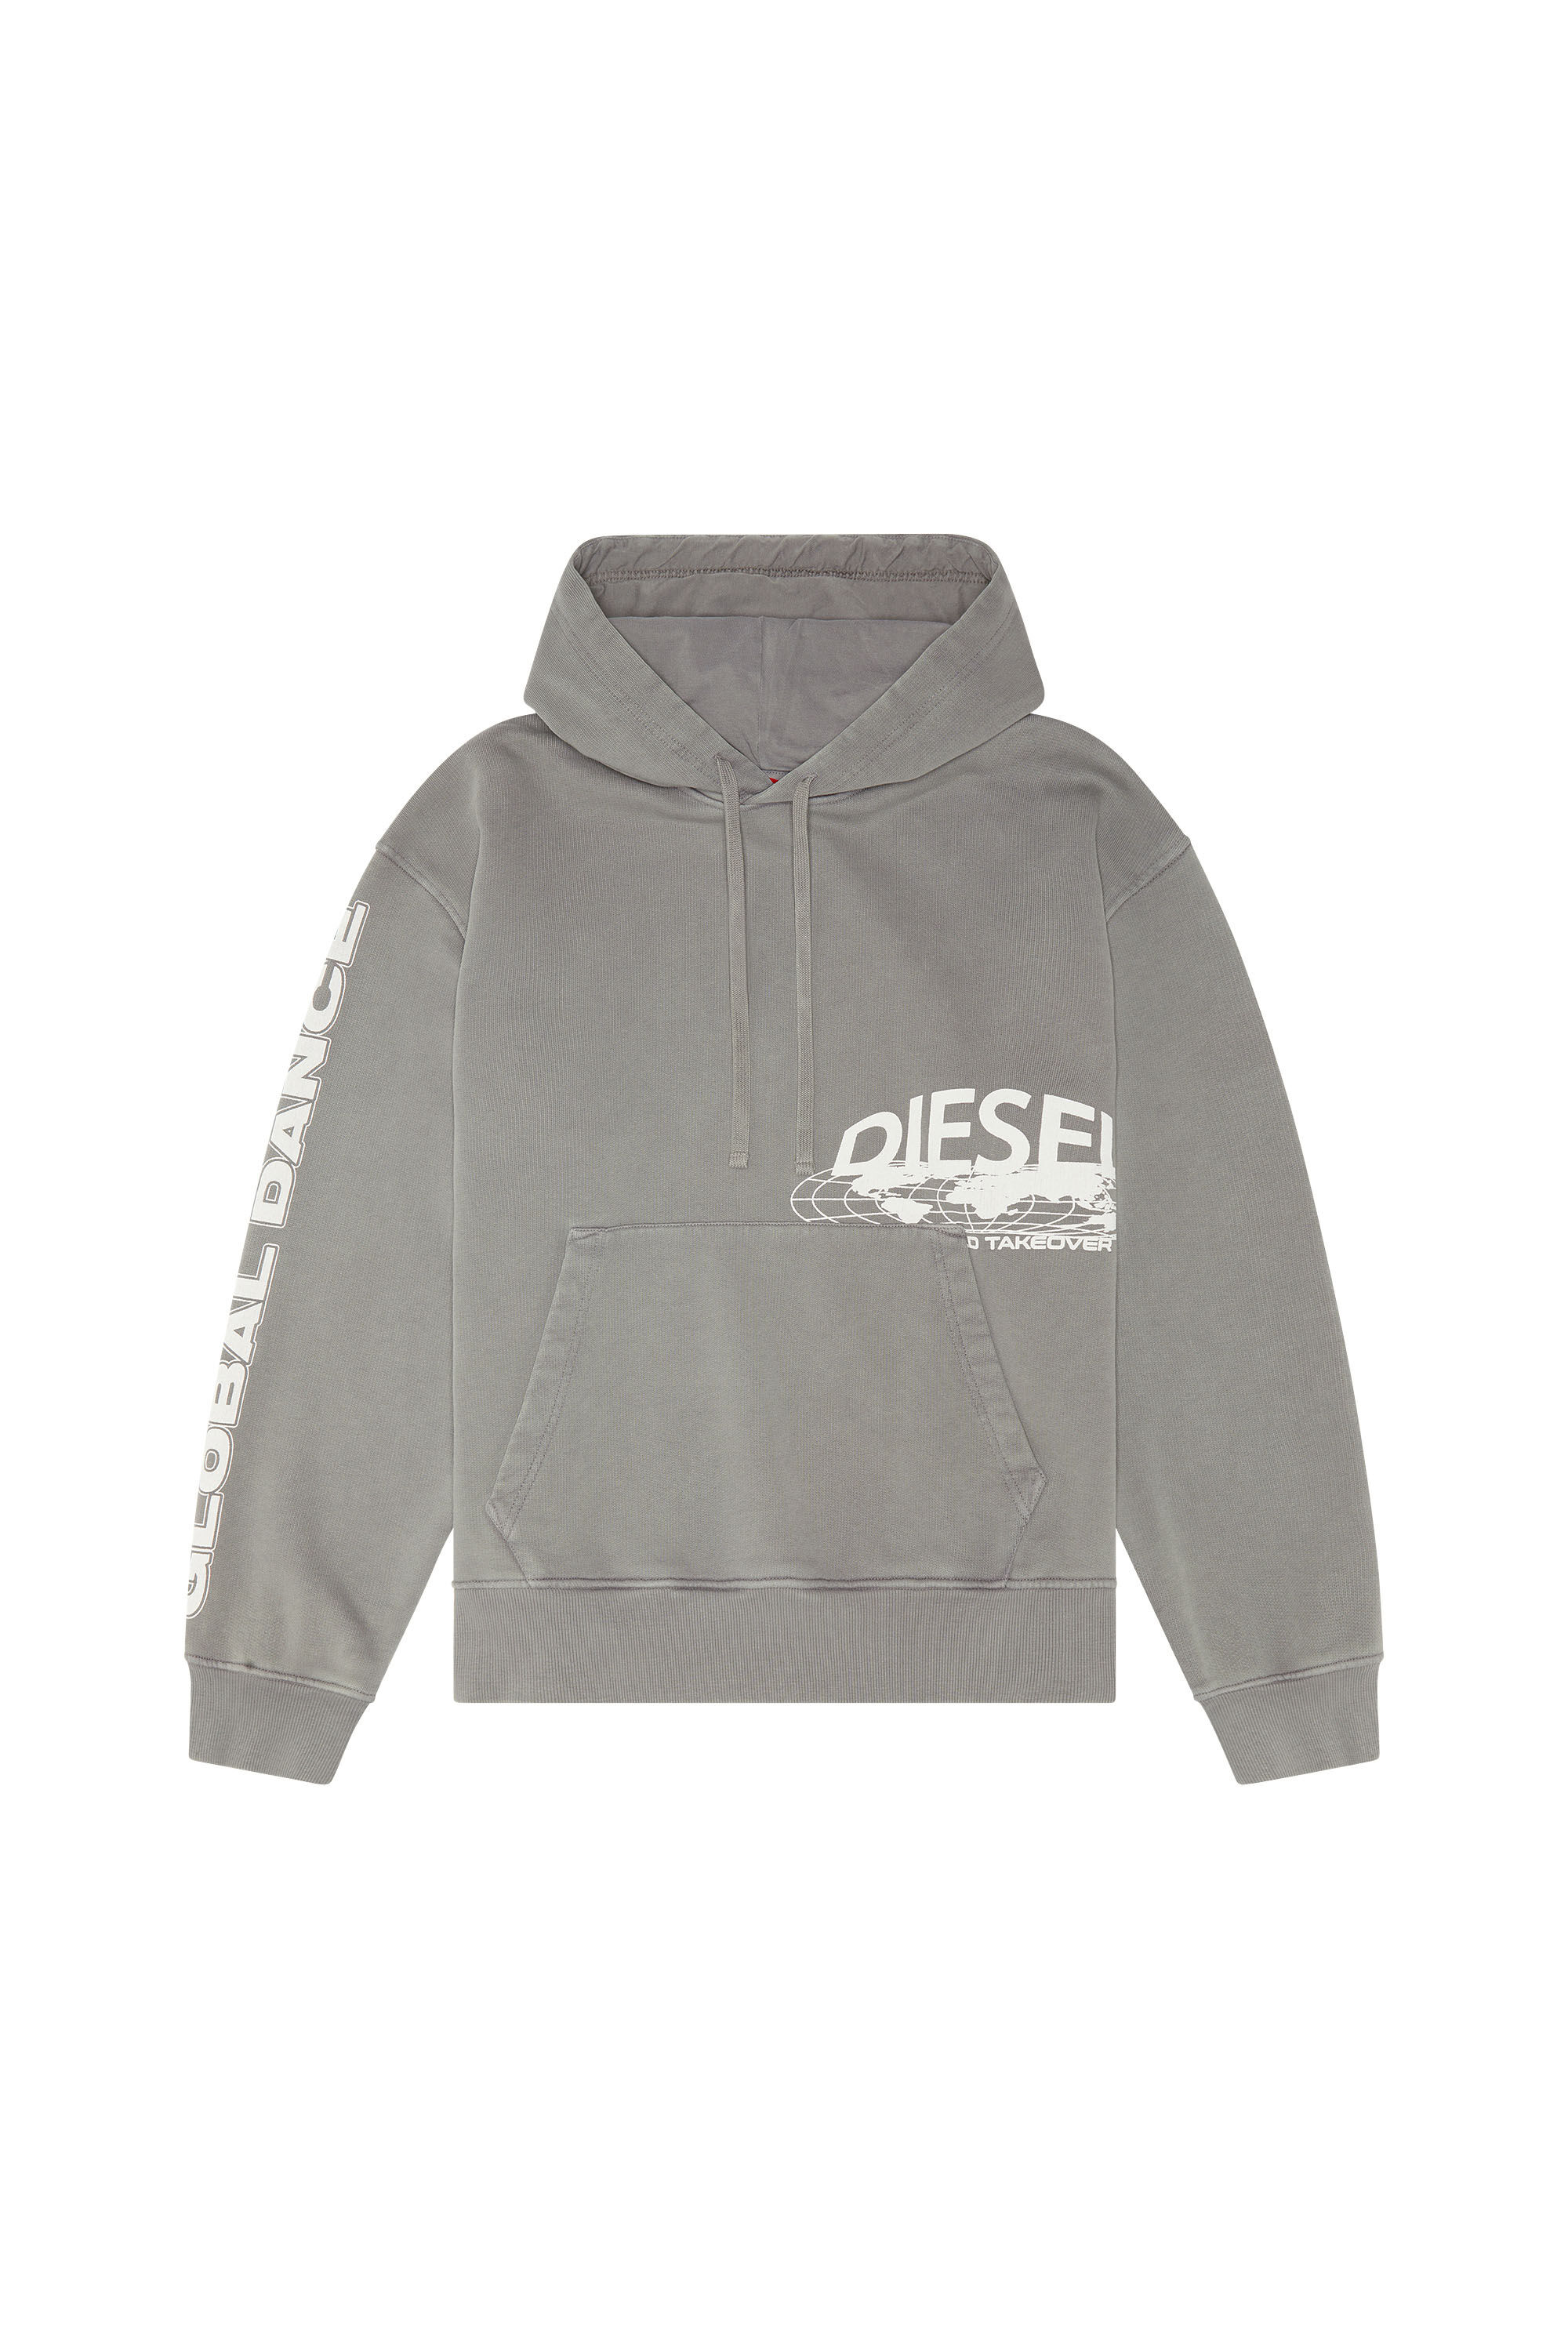 Men's Oversized faded hoodie with graphic print | S-MACS-HOOD-L1 Diesel